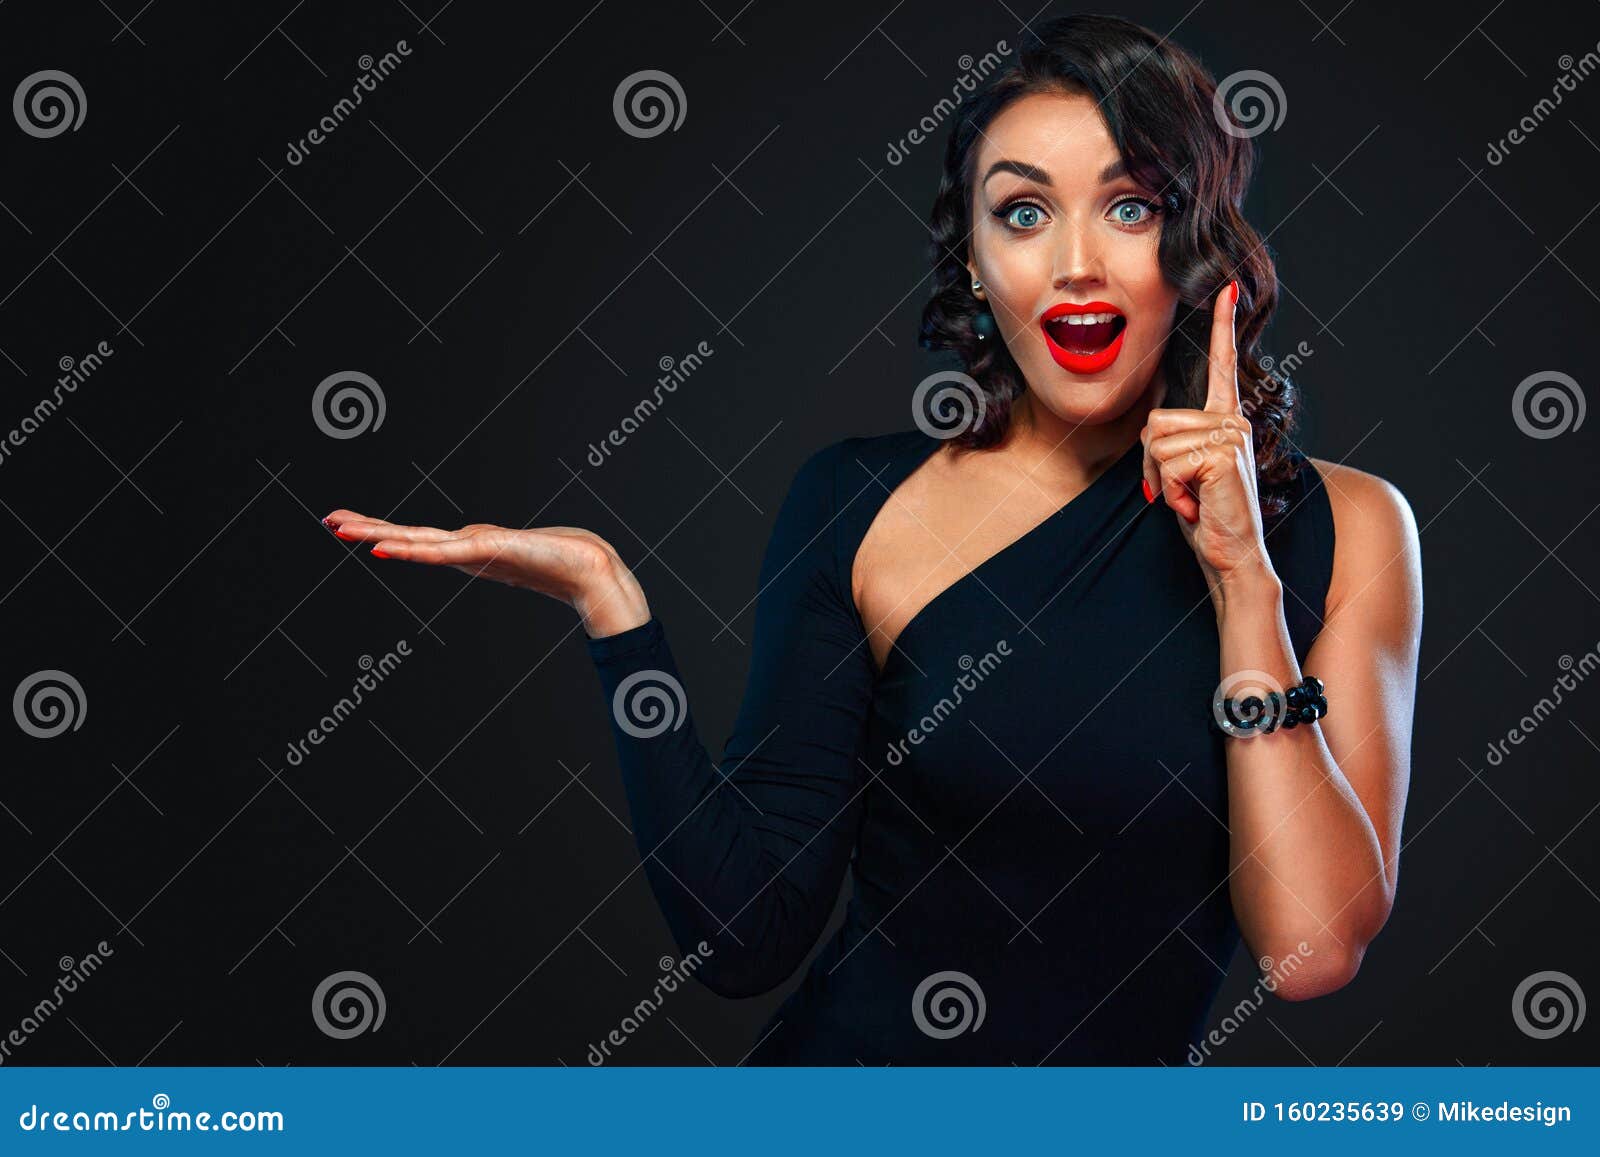 Attention and Wow Emotion. Black Friday Sale Concept with Beautiful Girl  with Curly Hair for Shop. Happy Young Woman Stock Image - Image of buyer,  beautiful: 160235639